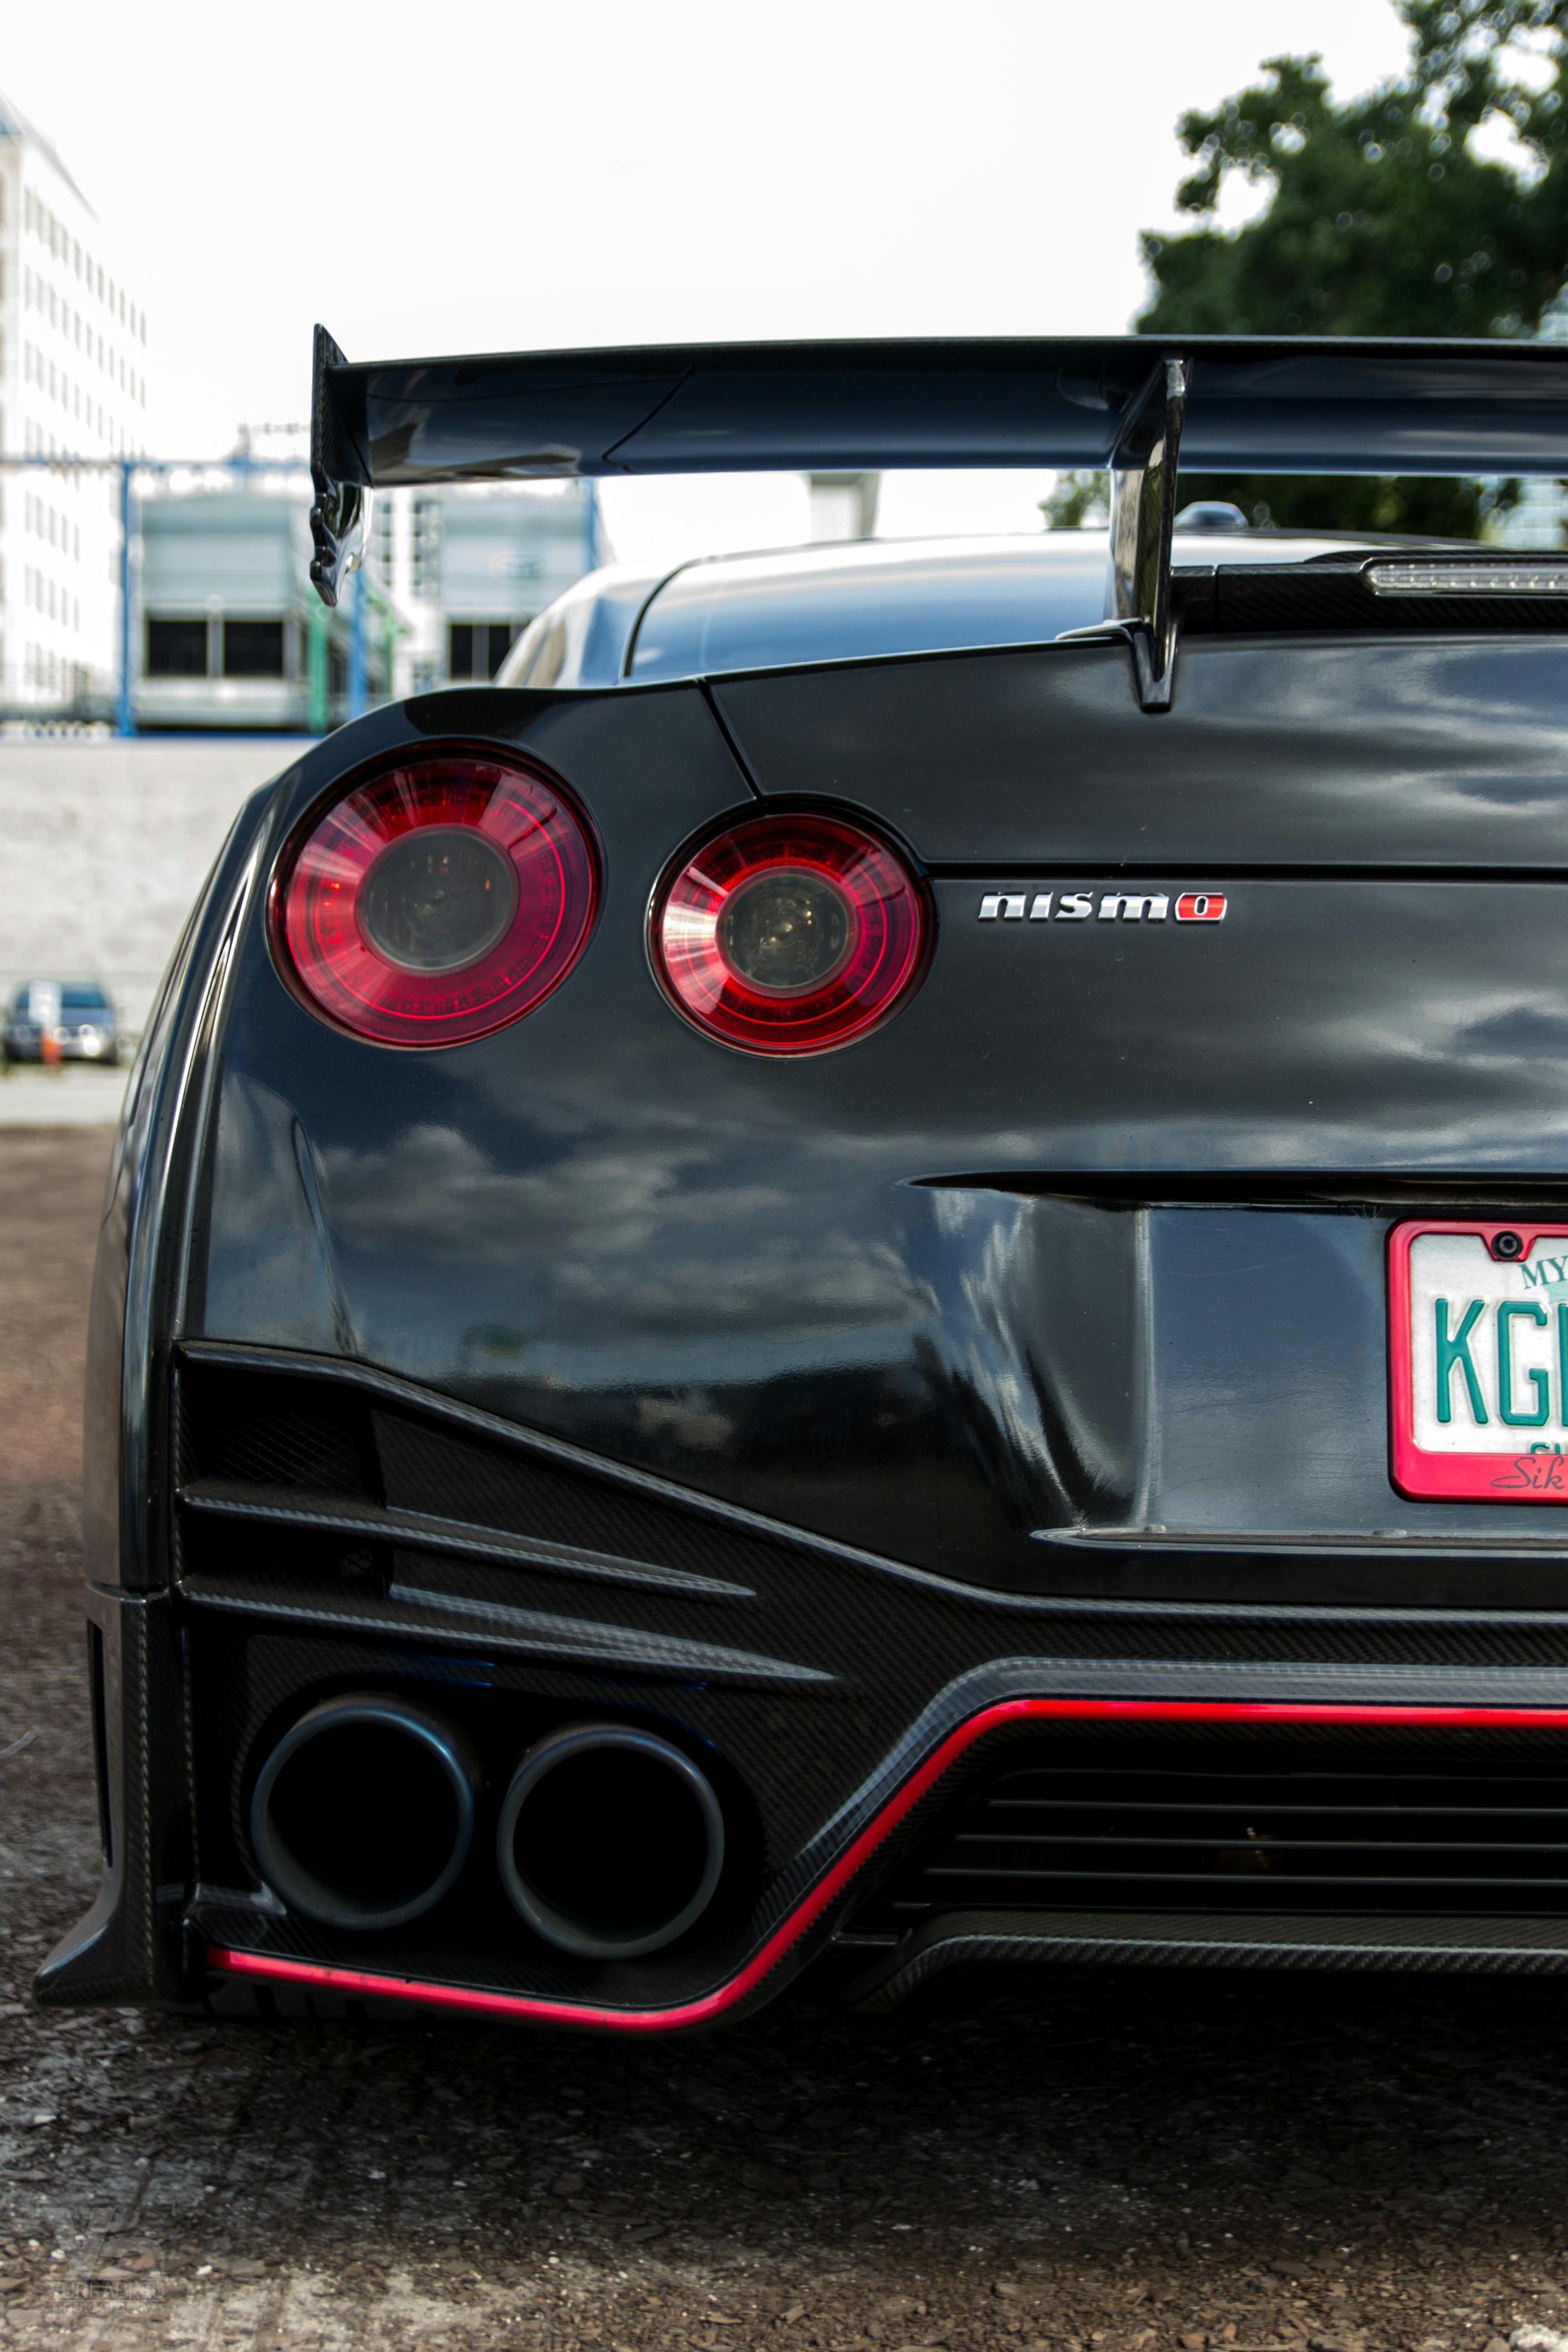 Nissan Gtr Photos, Download The BEST Free Nissan Gtr Stock Photos & HD  Images